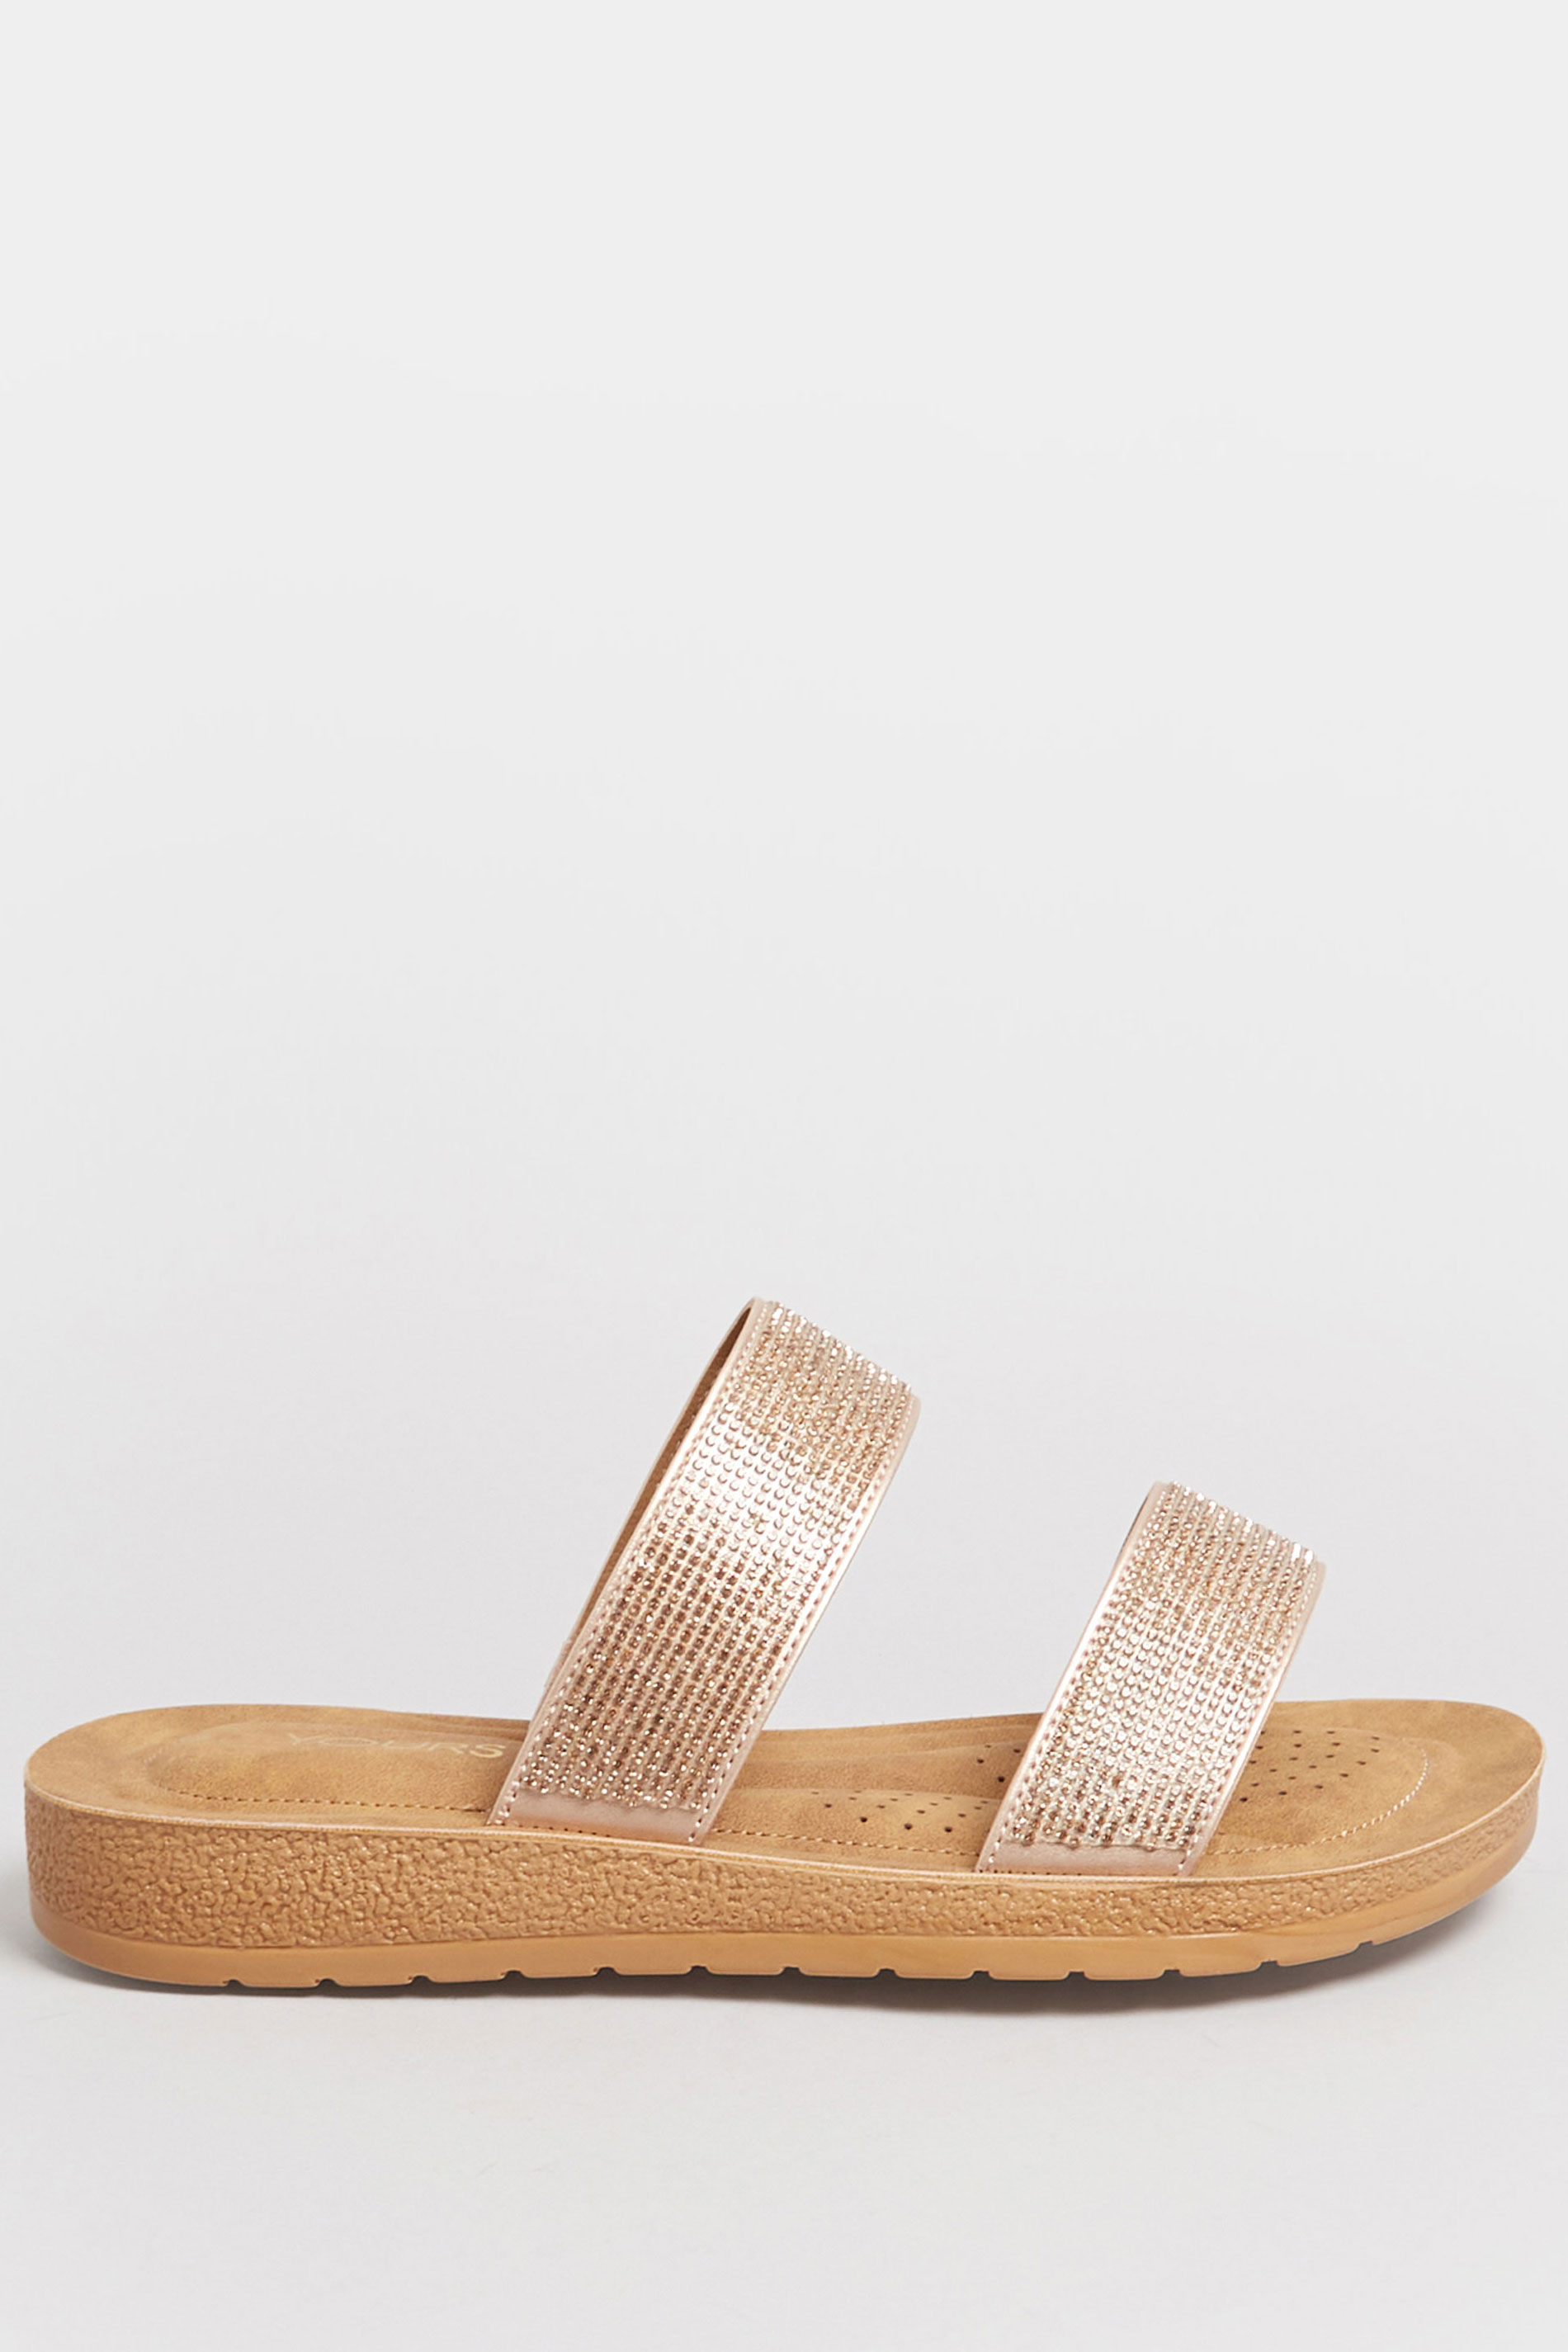 Rose Gold & Brown Glitter Strap Mule Sandals In Extra Wide EEE Fit | Yours Clothing  3